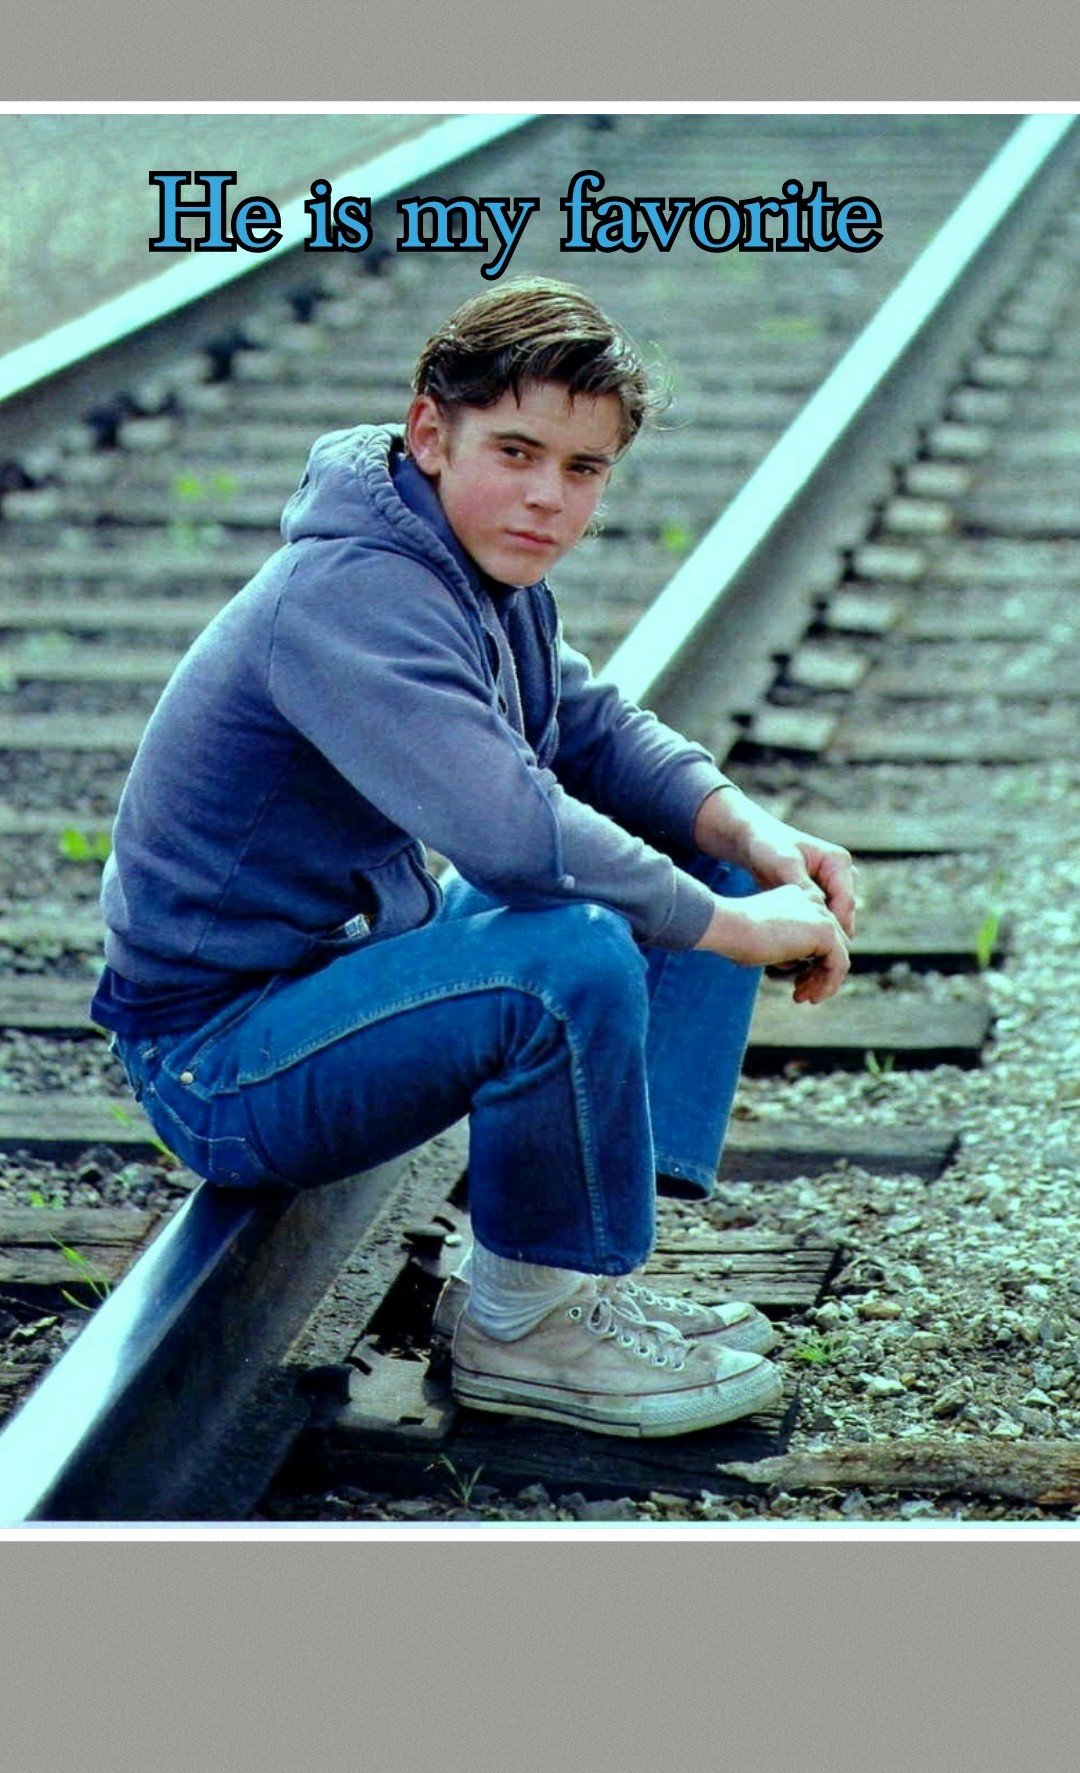 He is my favorite Ponyboy Curtis